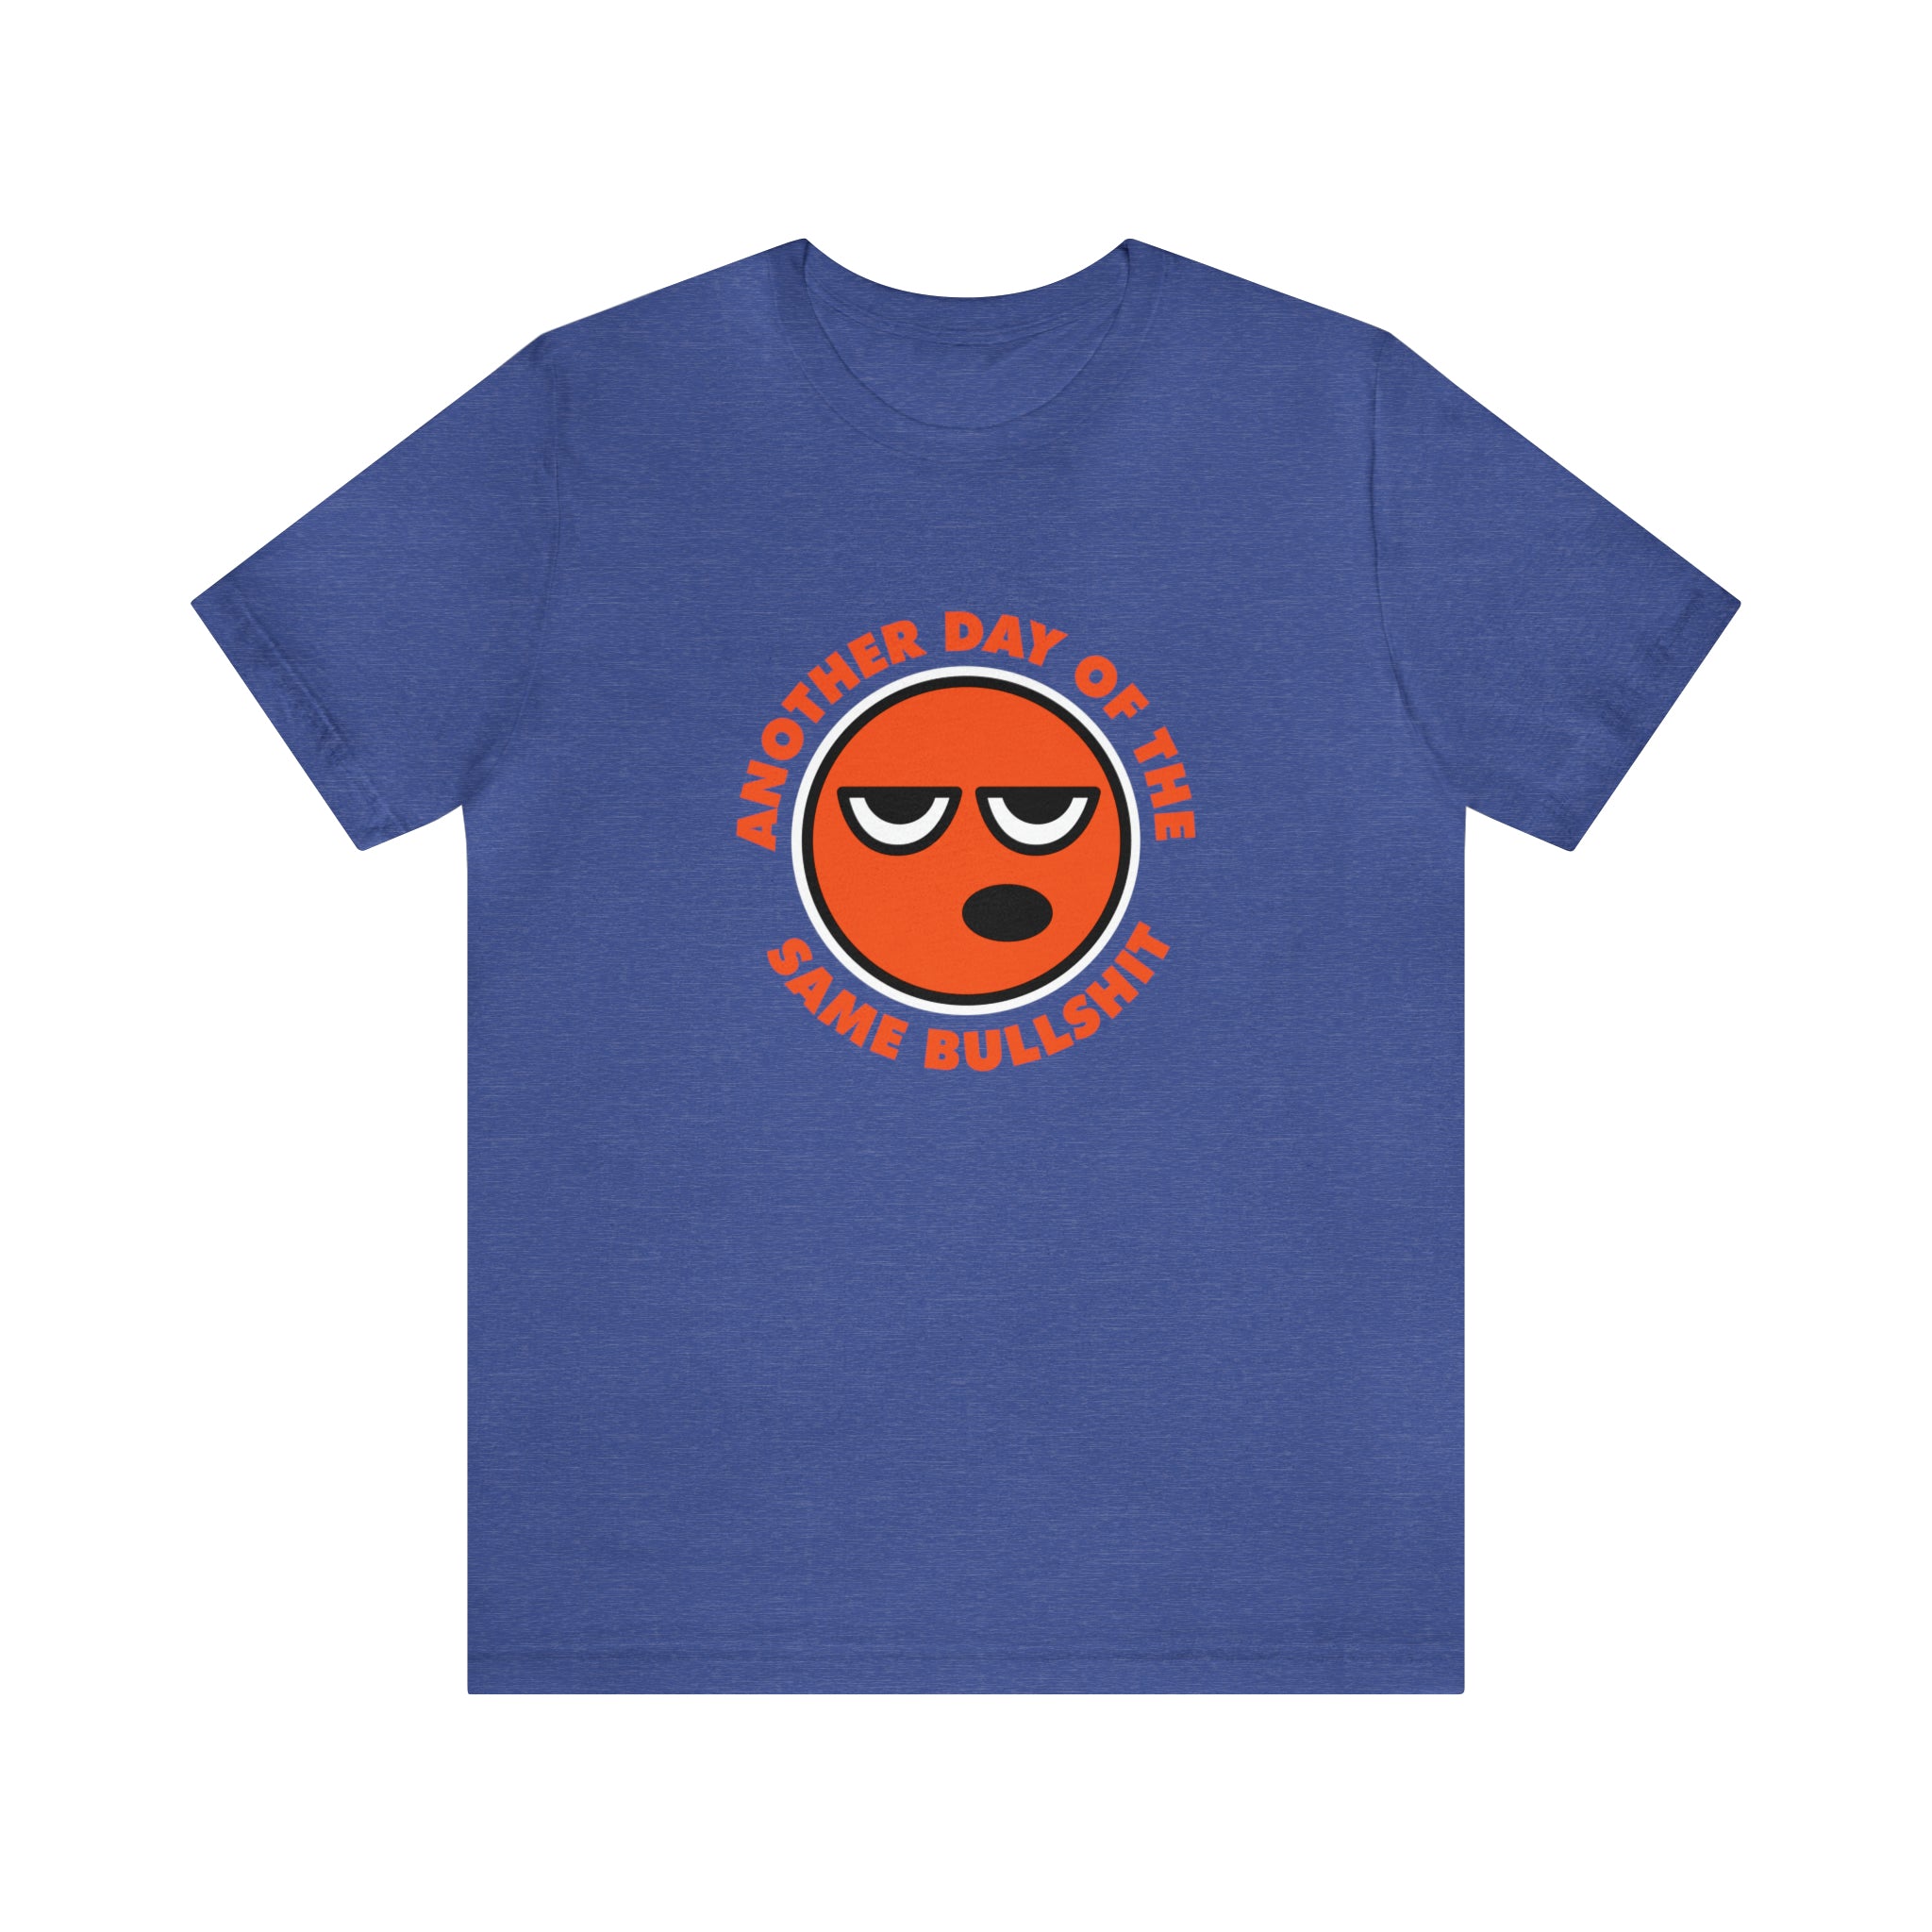 A comfortable Another Day of the Same Bullshit T-shirt with an orange smiley face.